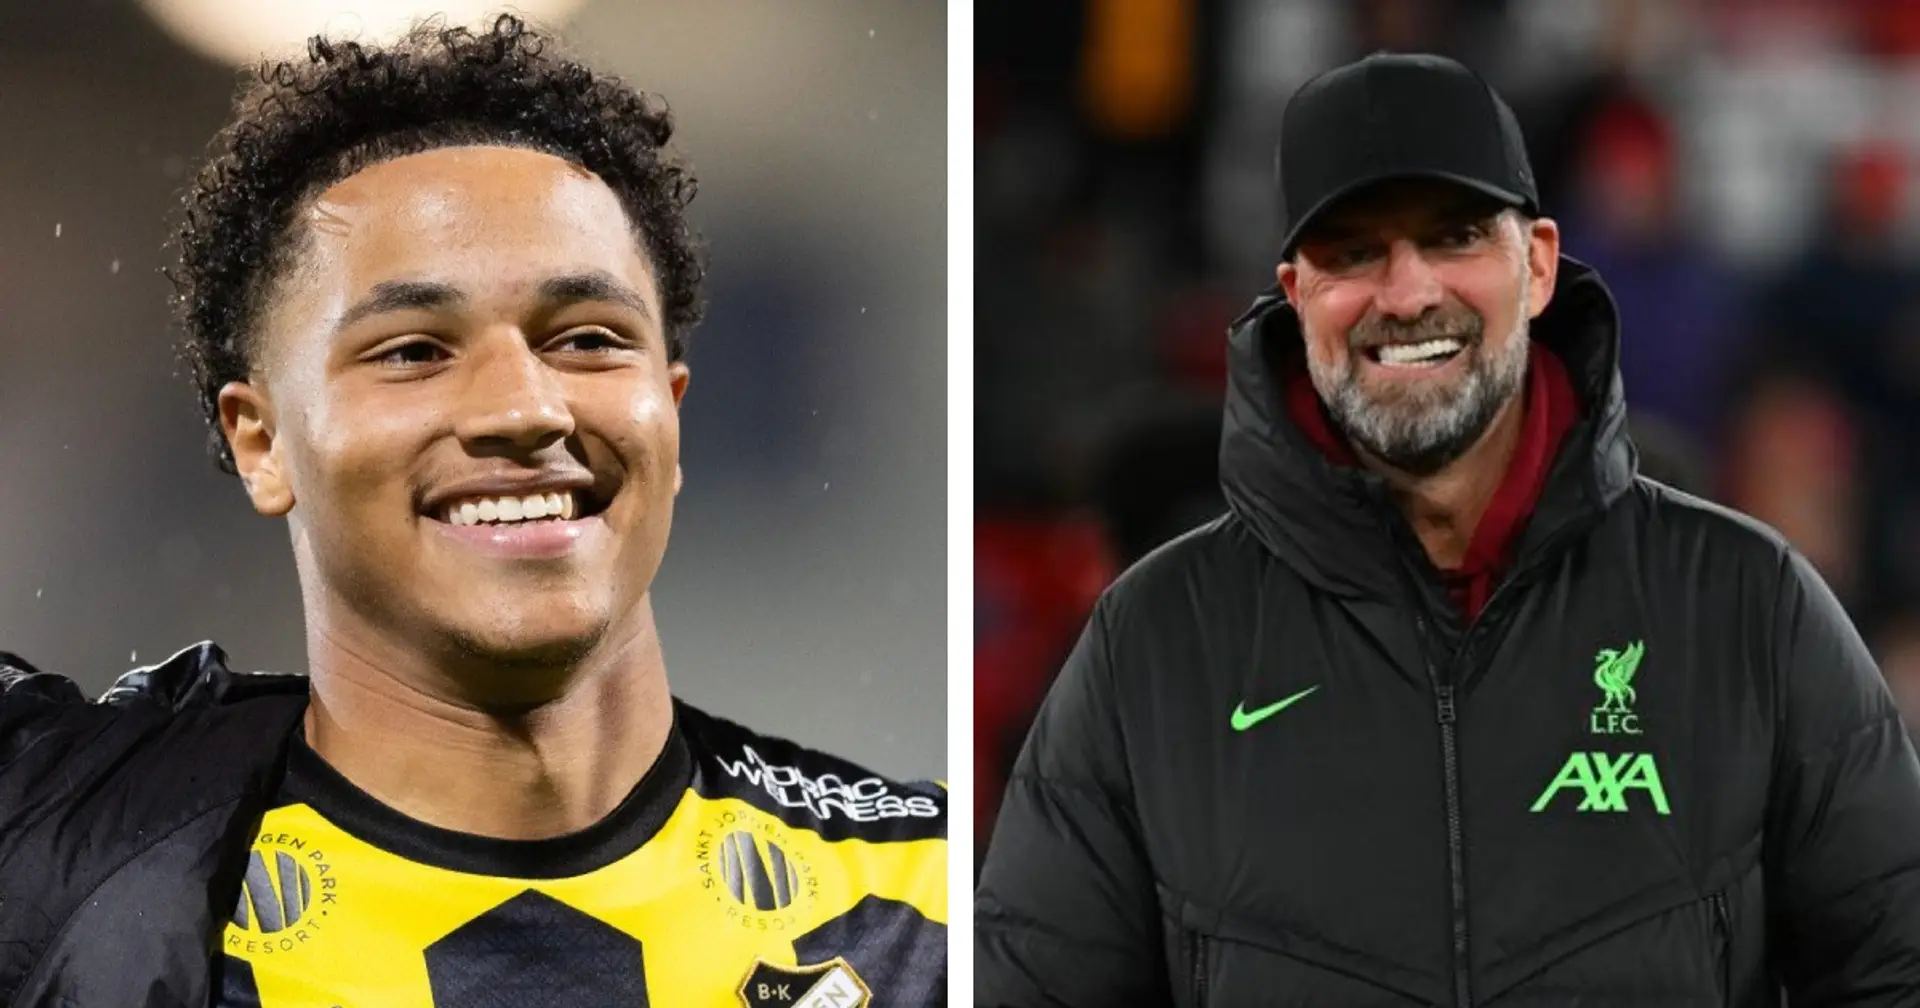 'I'd laugh': Liverpool target on how he'd react if Klopp called him